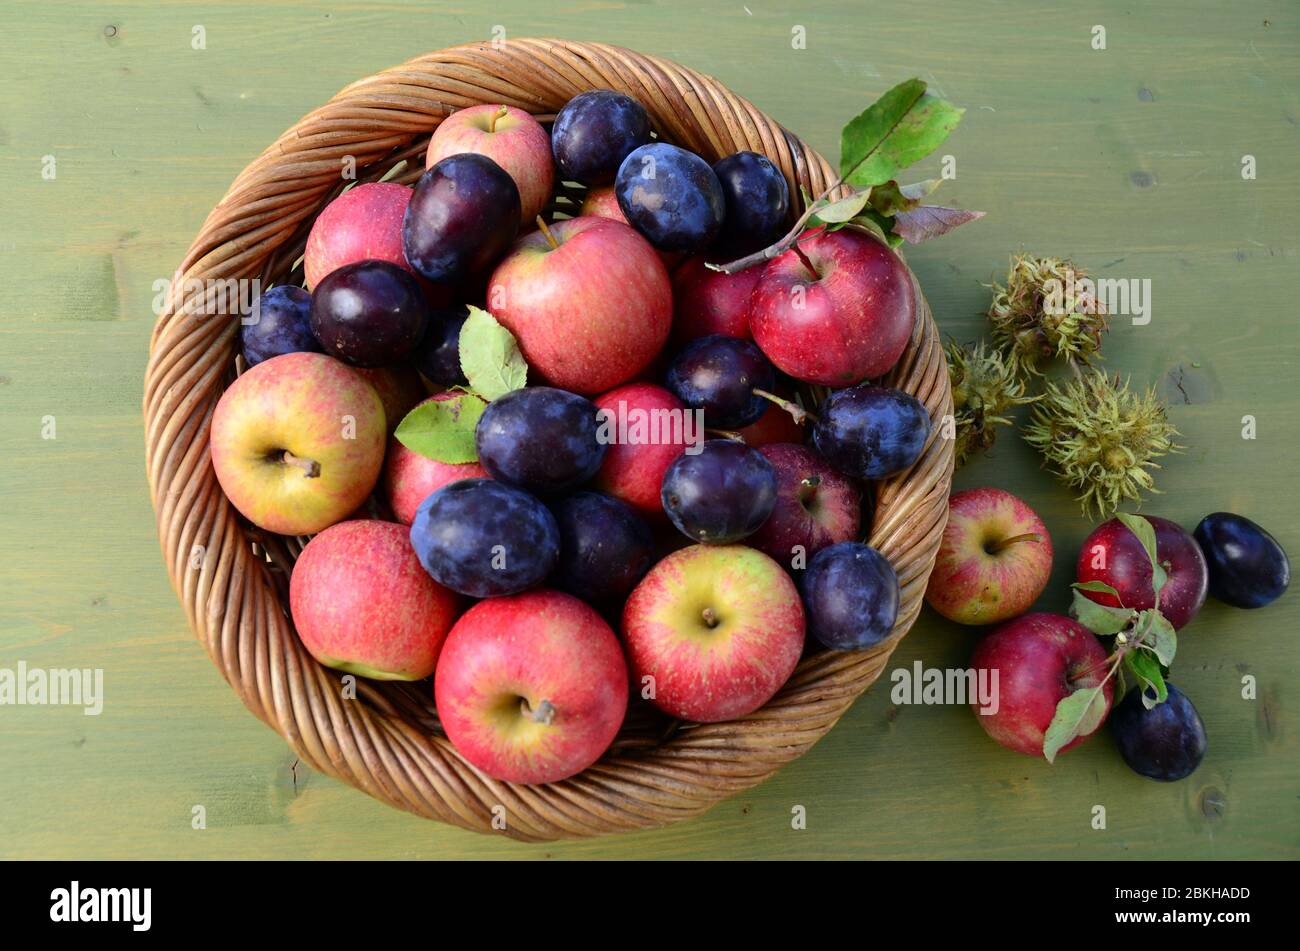 Basket with freshly harvested apples and plums. Stock Photo